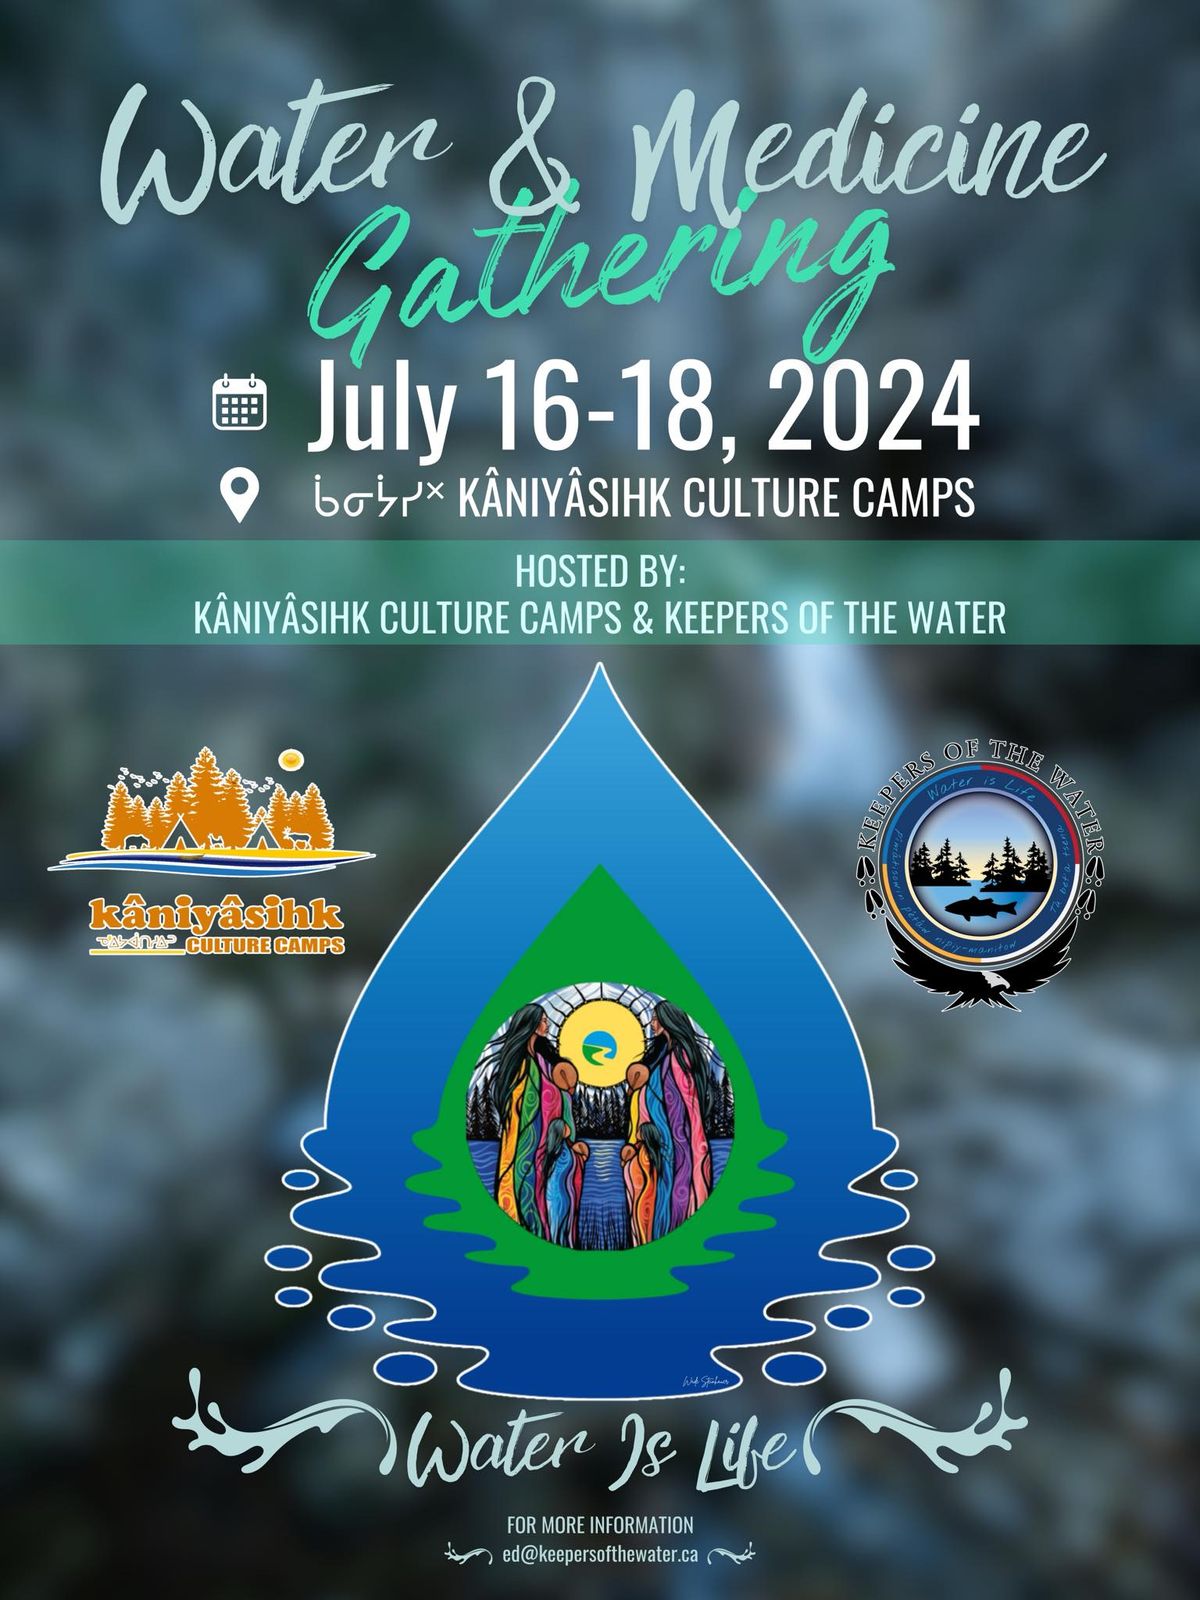 KOW's Annual Water & Medicine Gathering